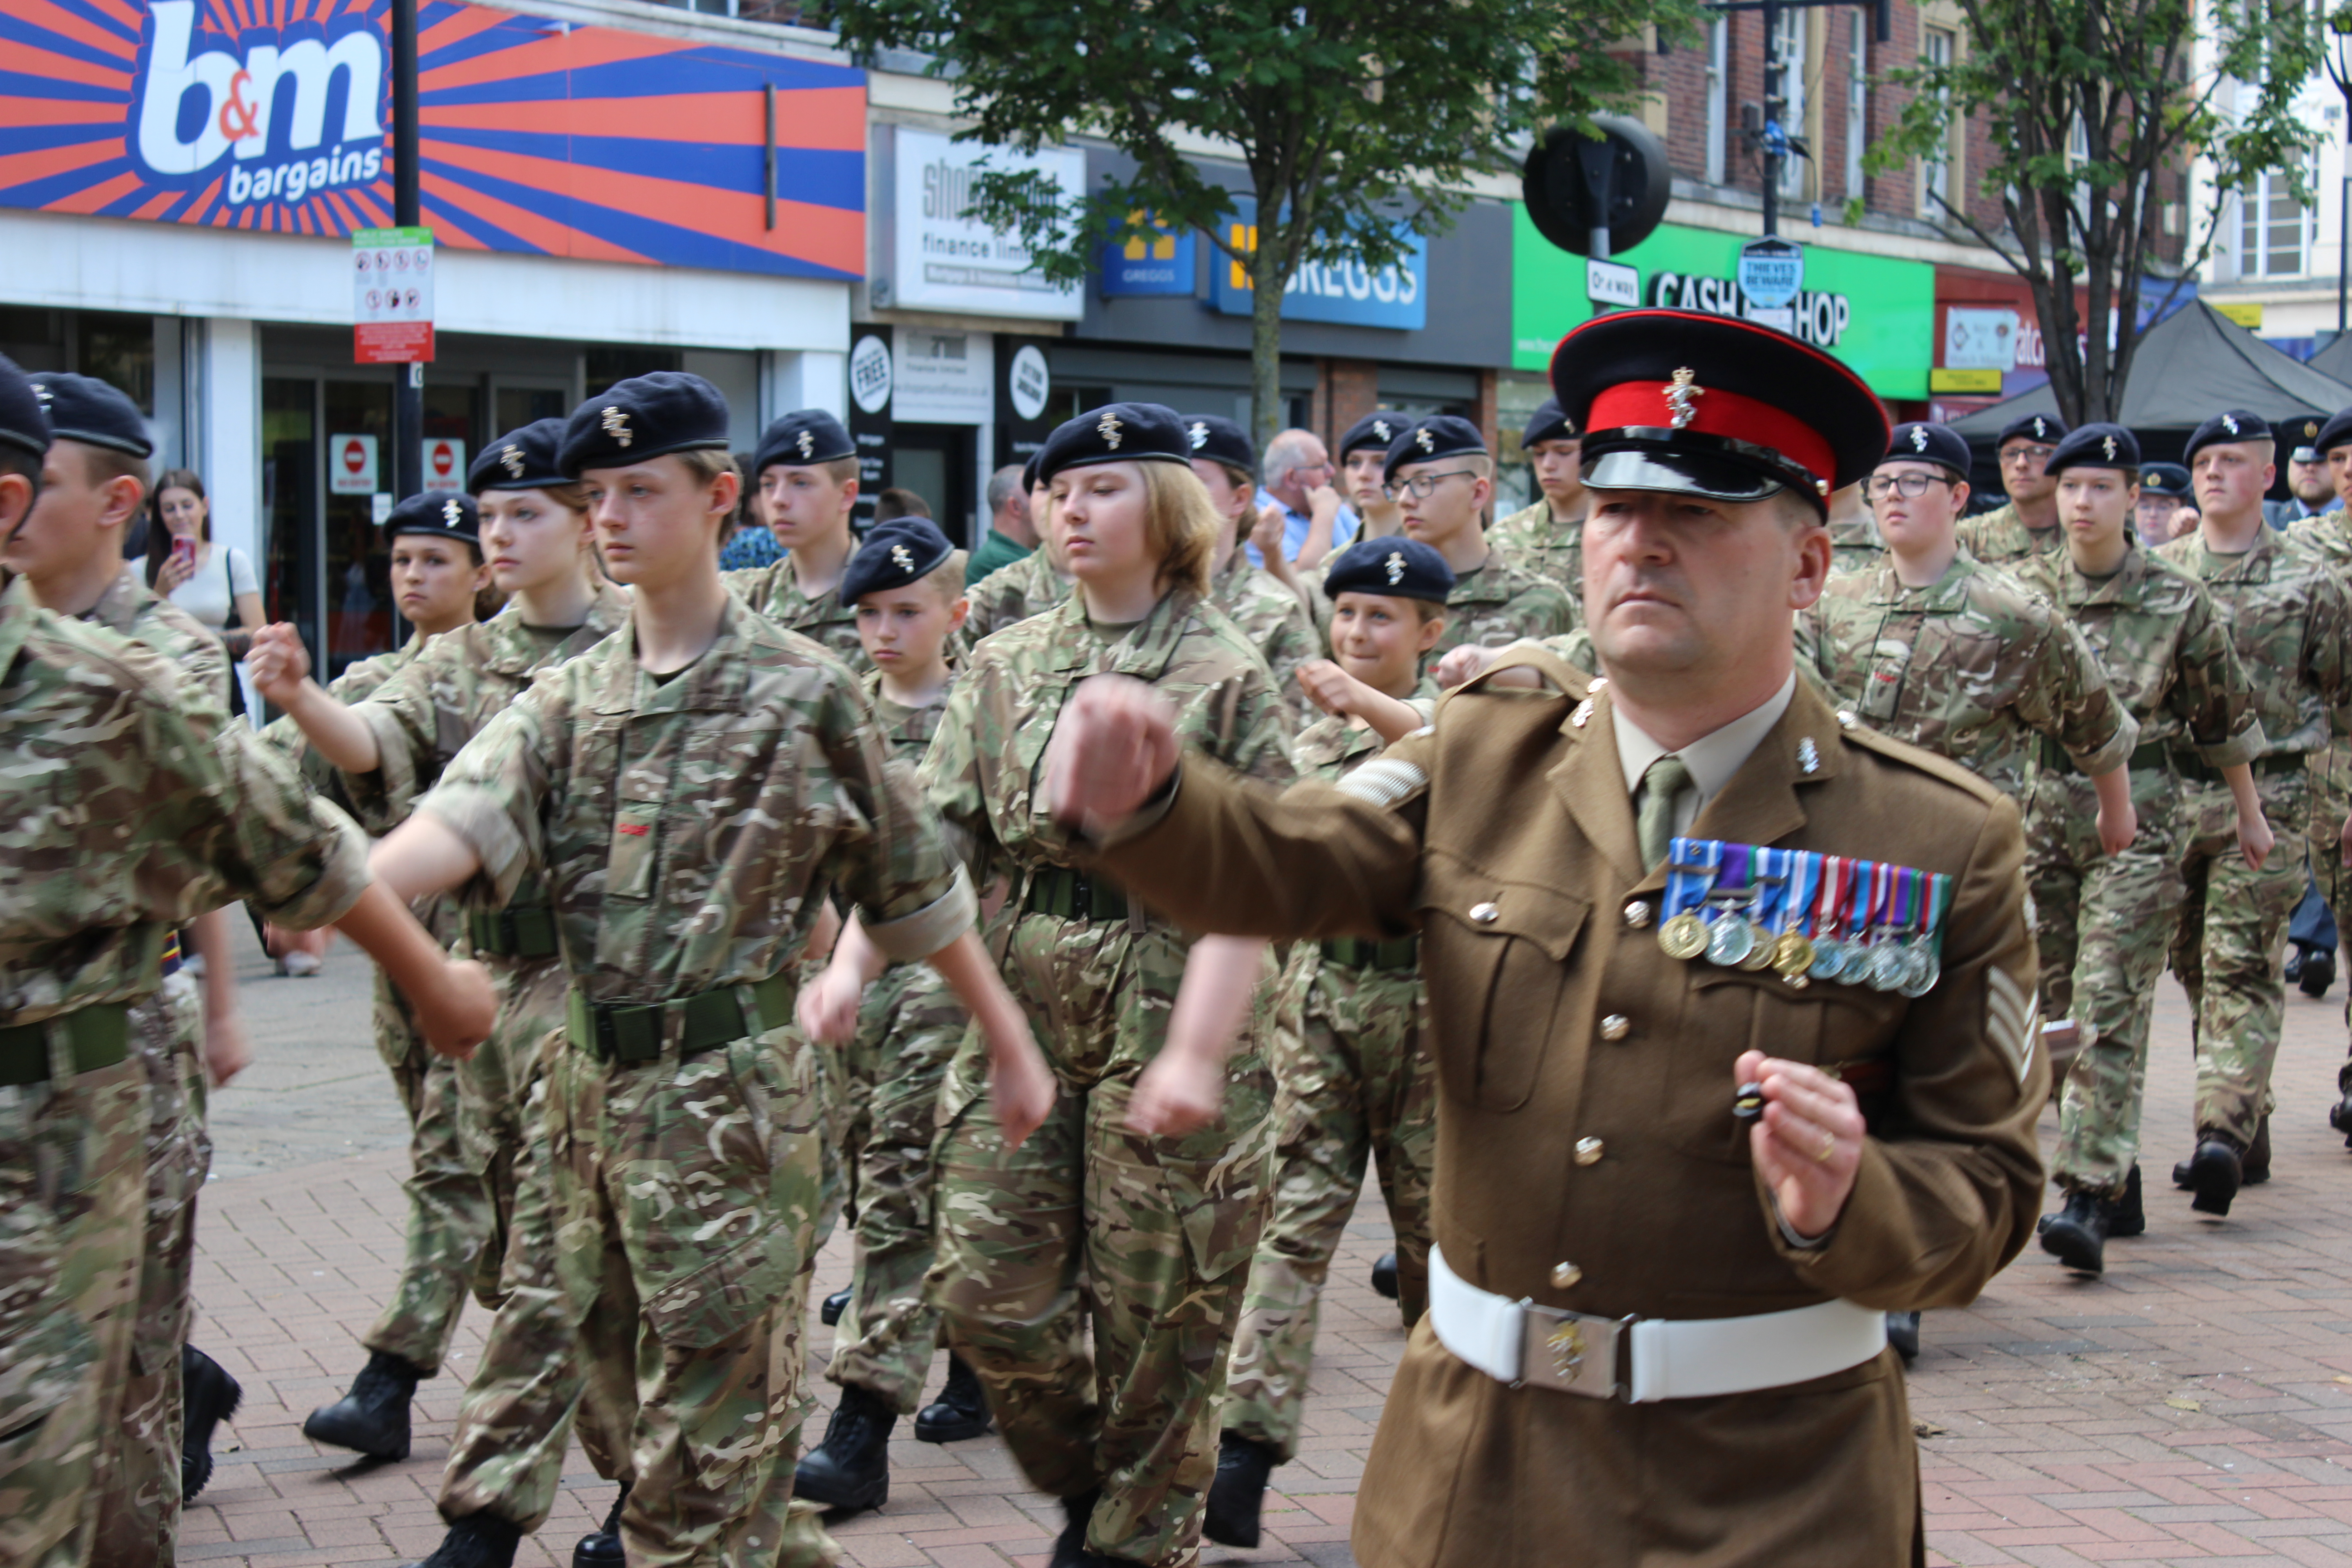 Armed forces day parade 18